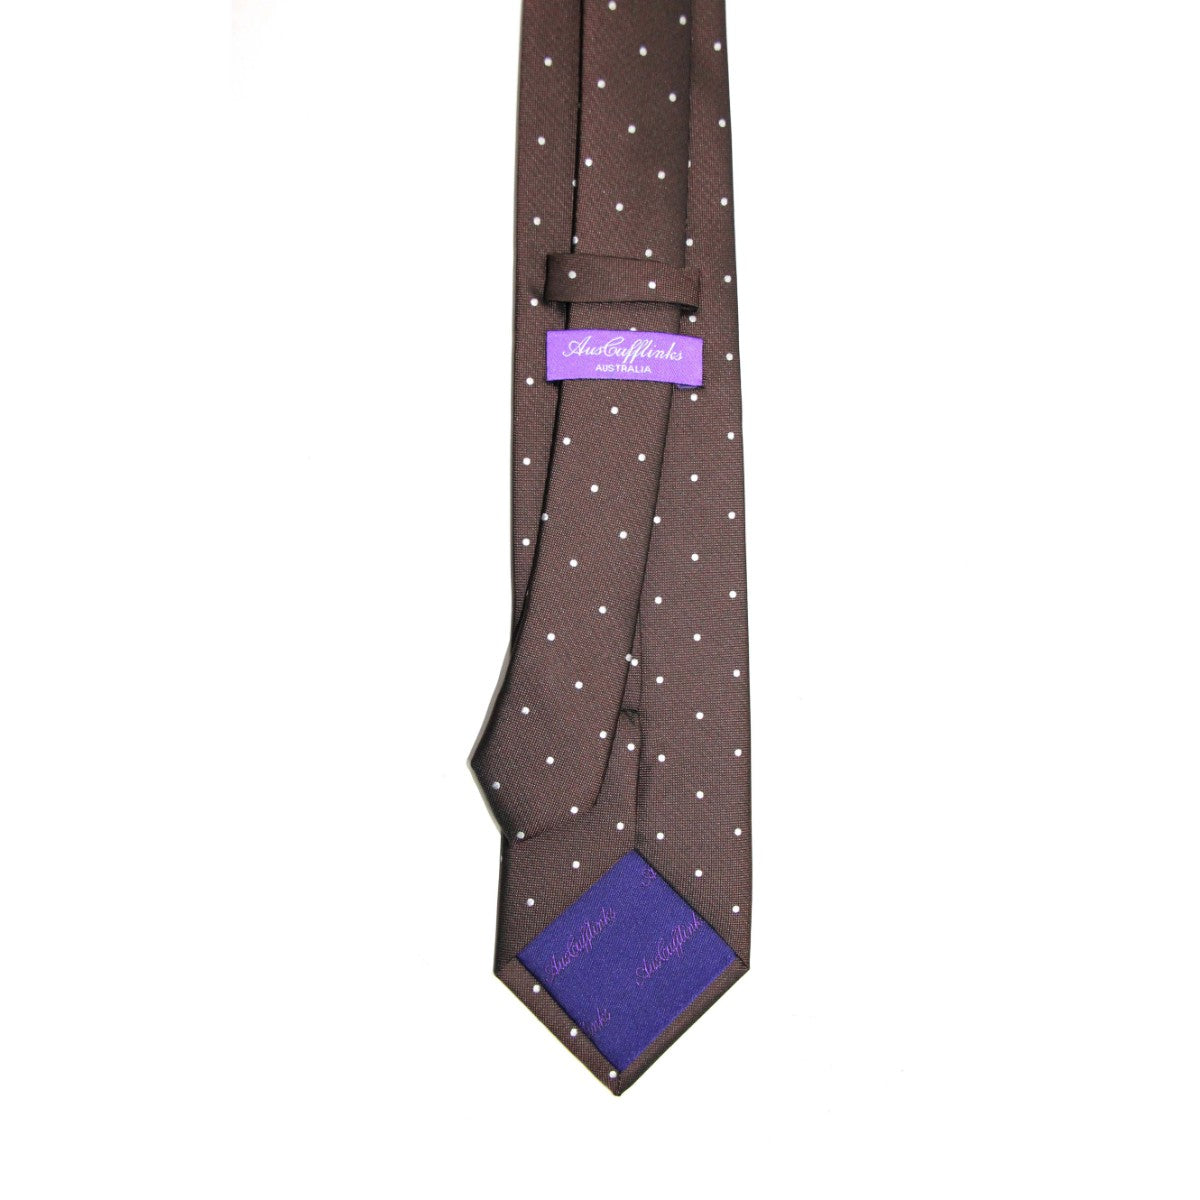 A playful Brown White Polka Dot Business Tie & Pocket Square Set on a white background.